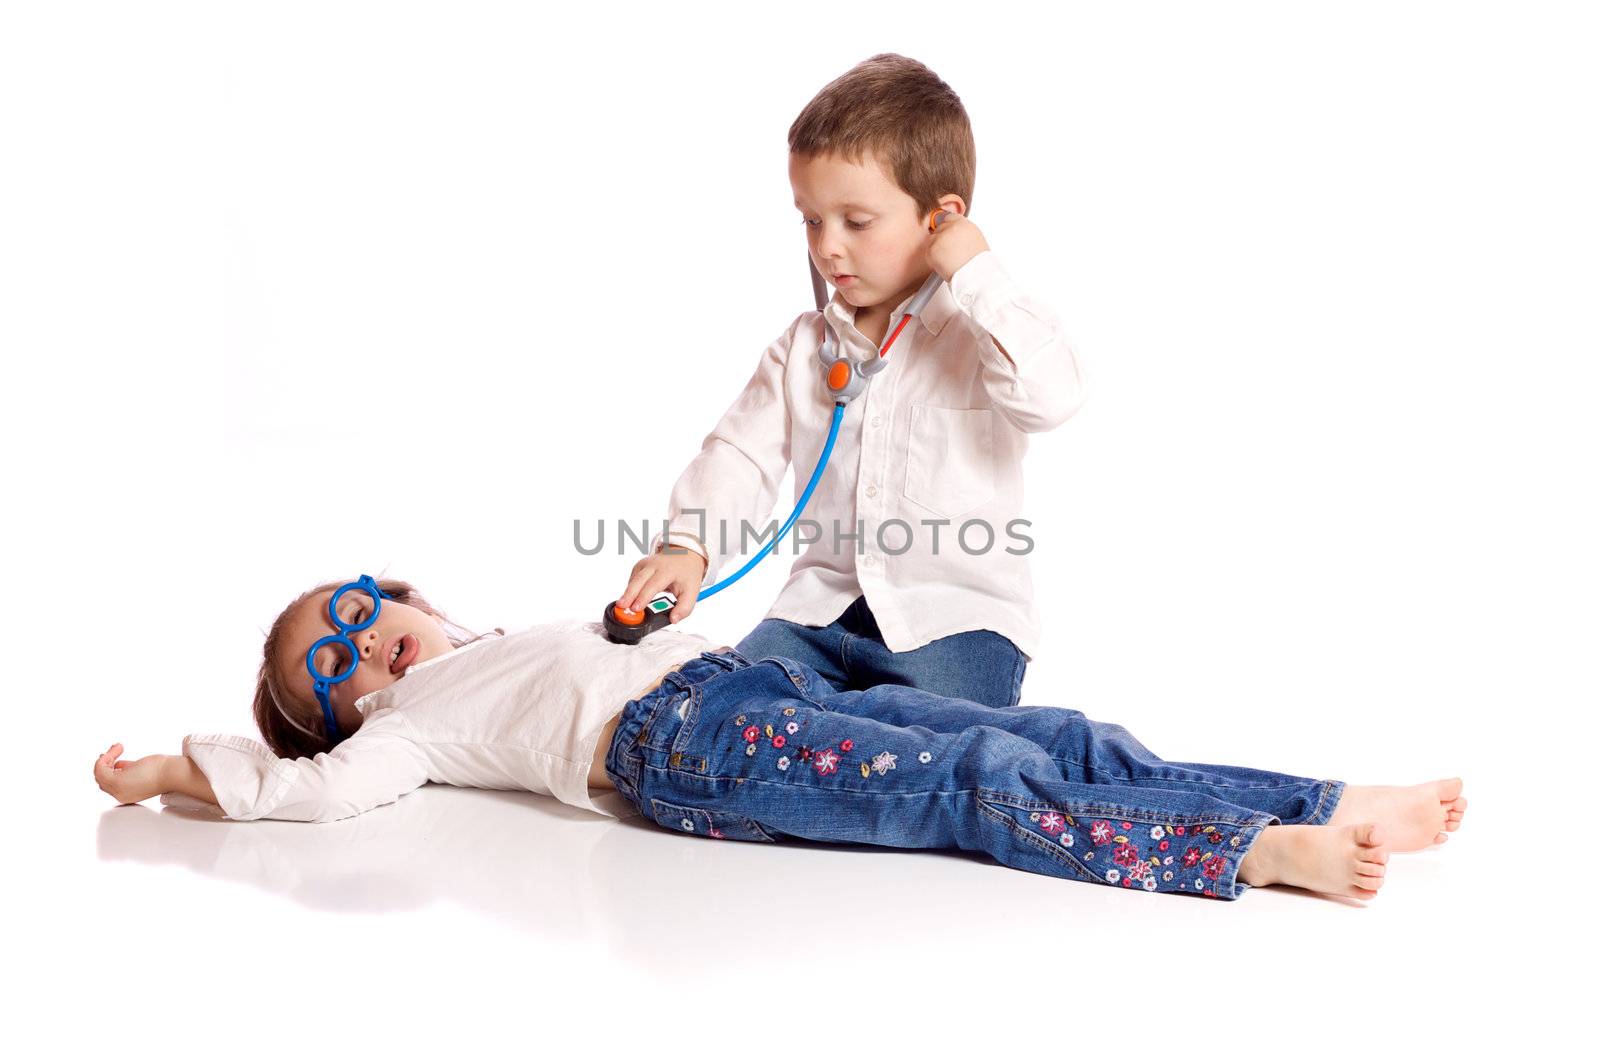 Playing doctor by Talanis